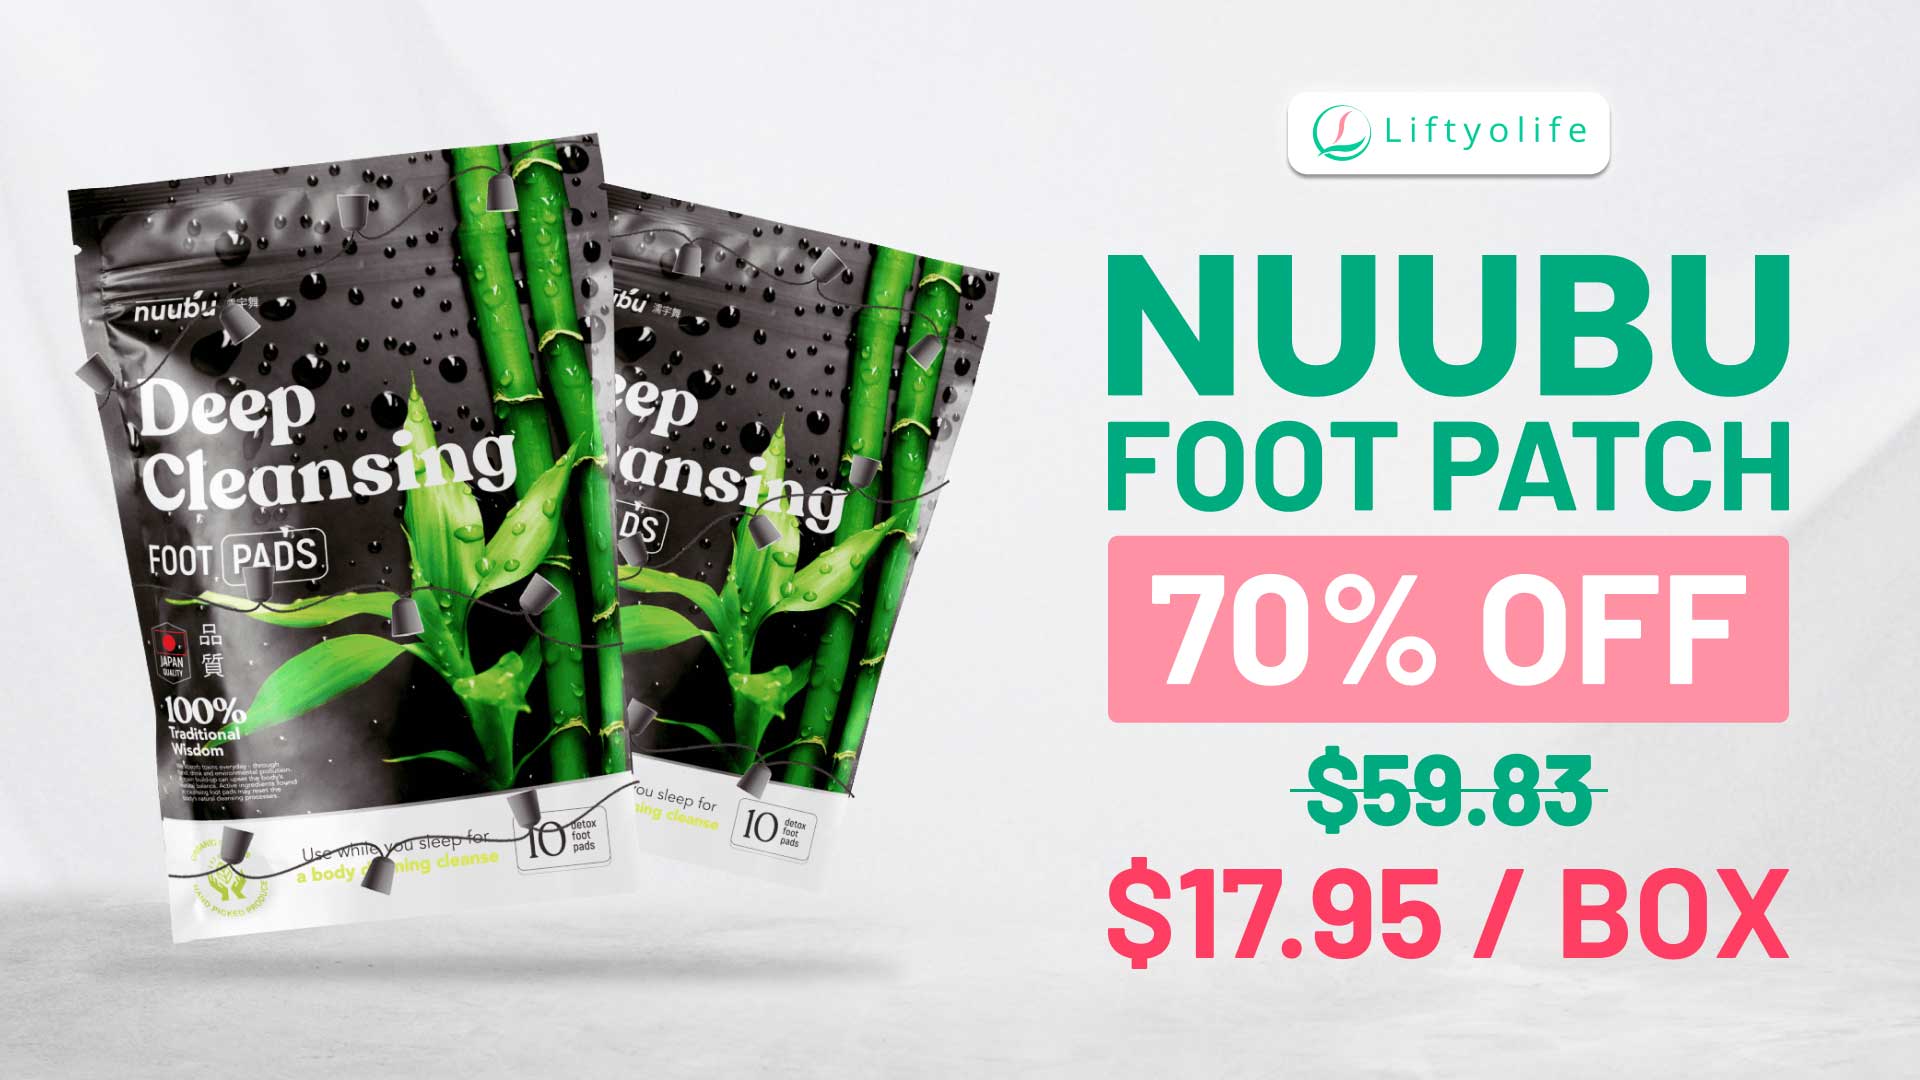 Nuubu Foot Patch Review: The Price